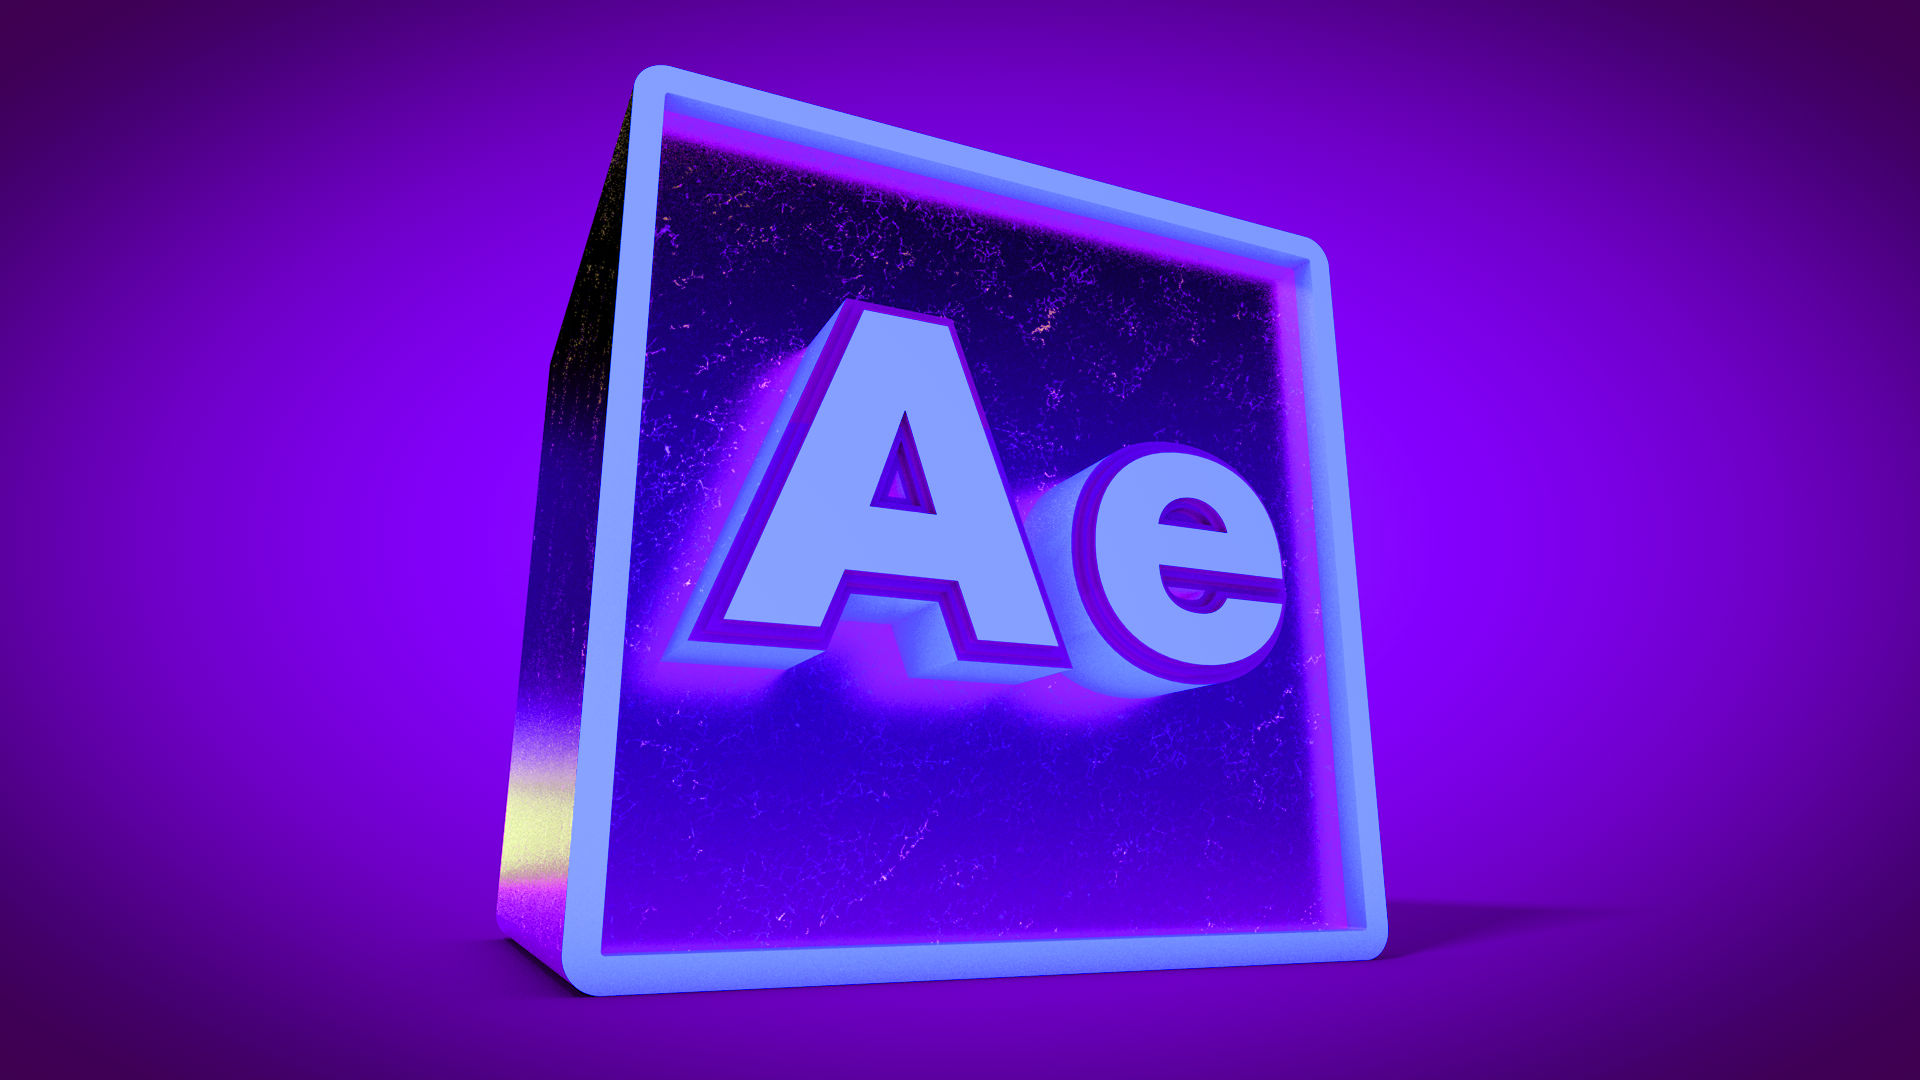 3д after effects. Adobe after Effects. Адобе Афтер эффект. Логотип after Effects. Значок Adobe after Effects.